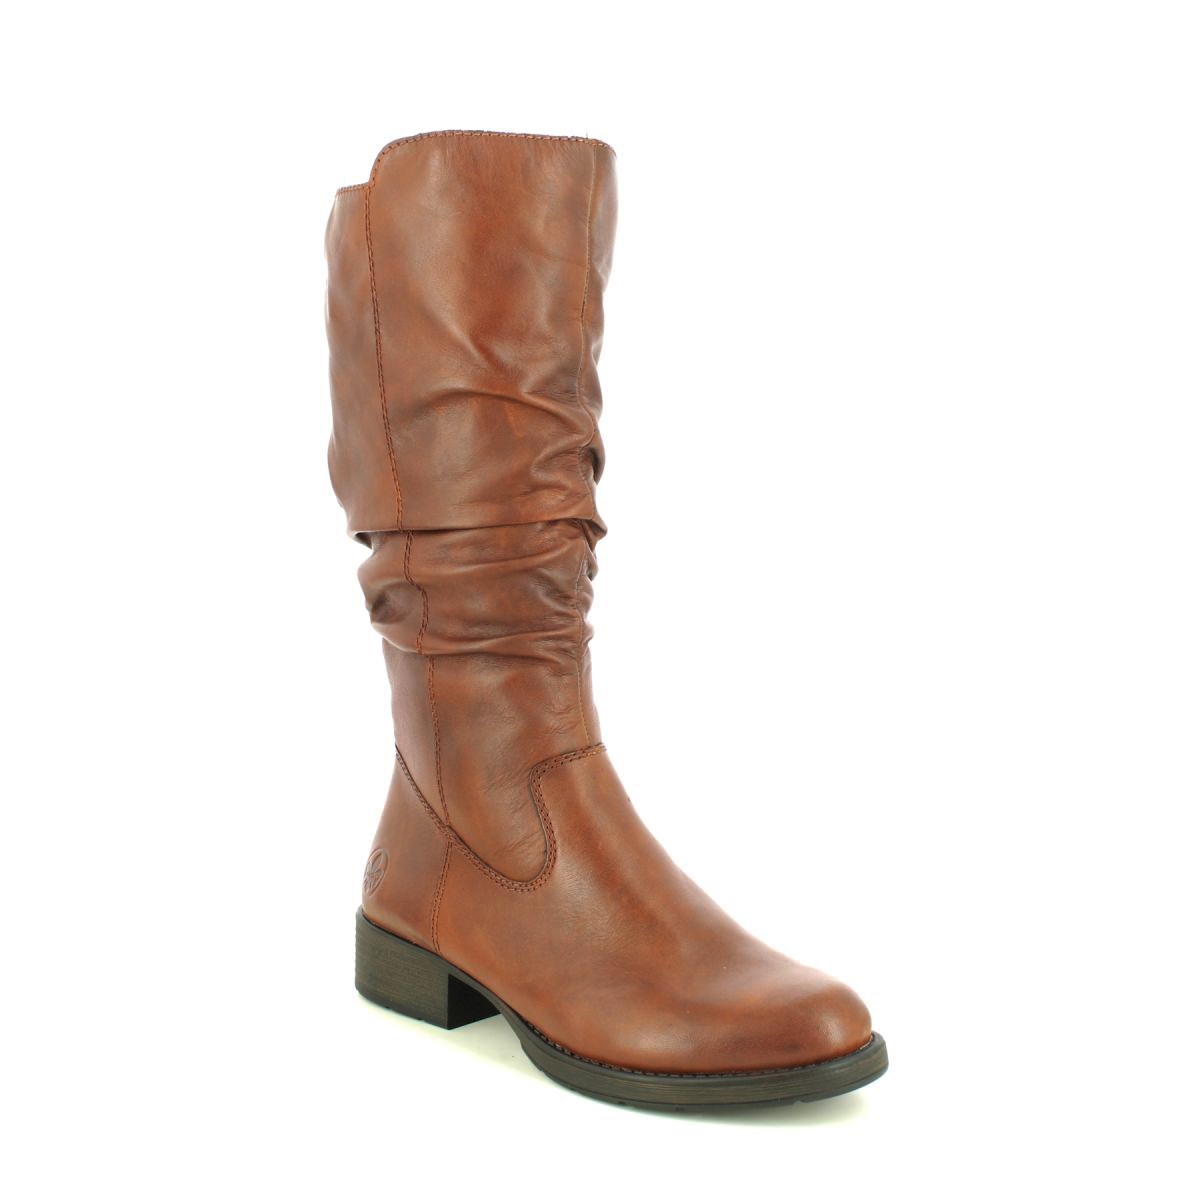 Rieker Z9563-22 Brown leather Womens Mid Calf Boots